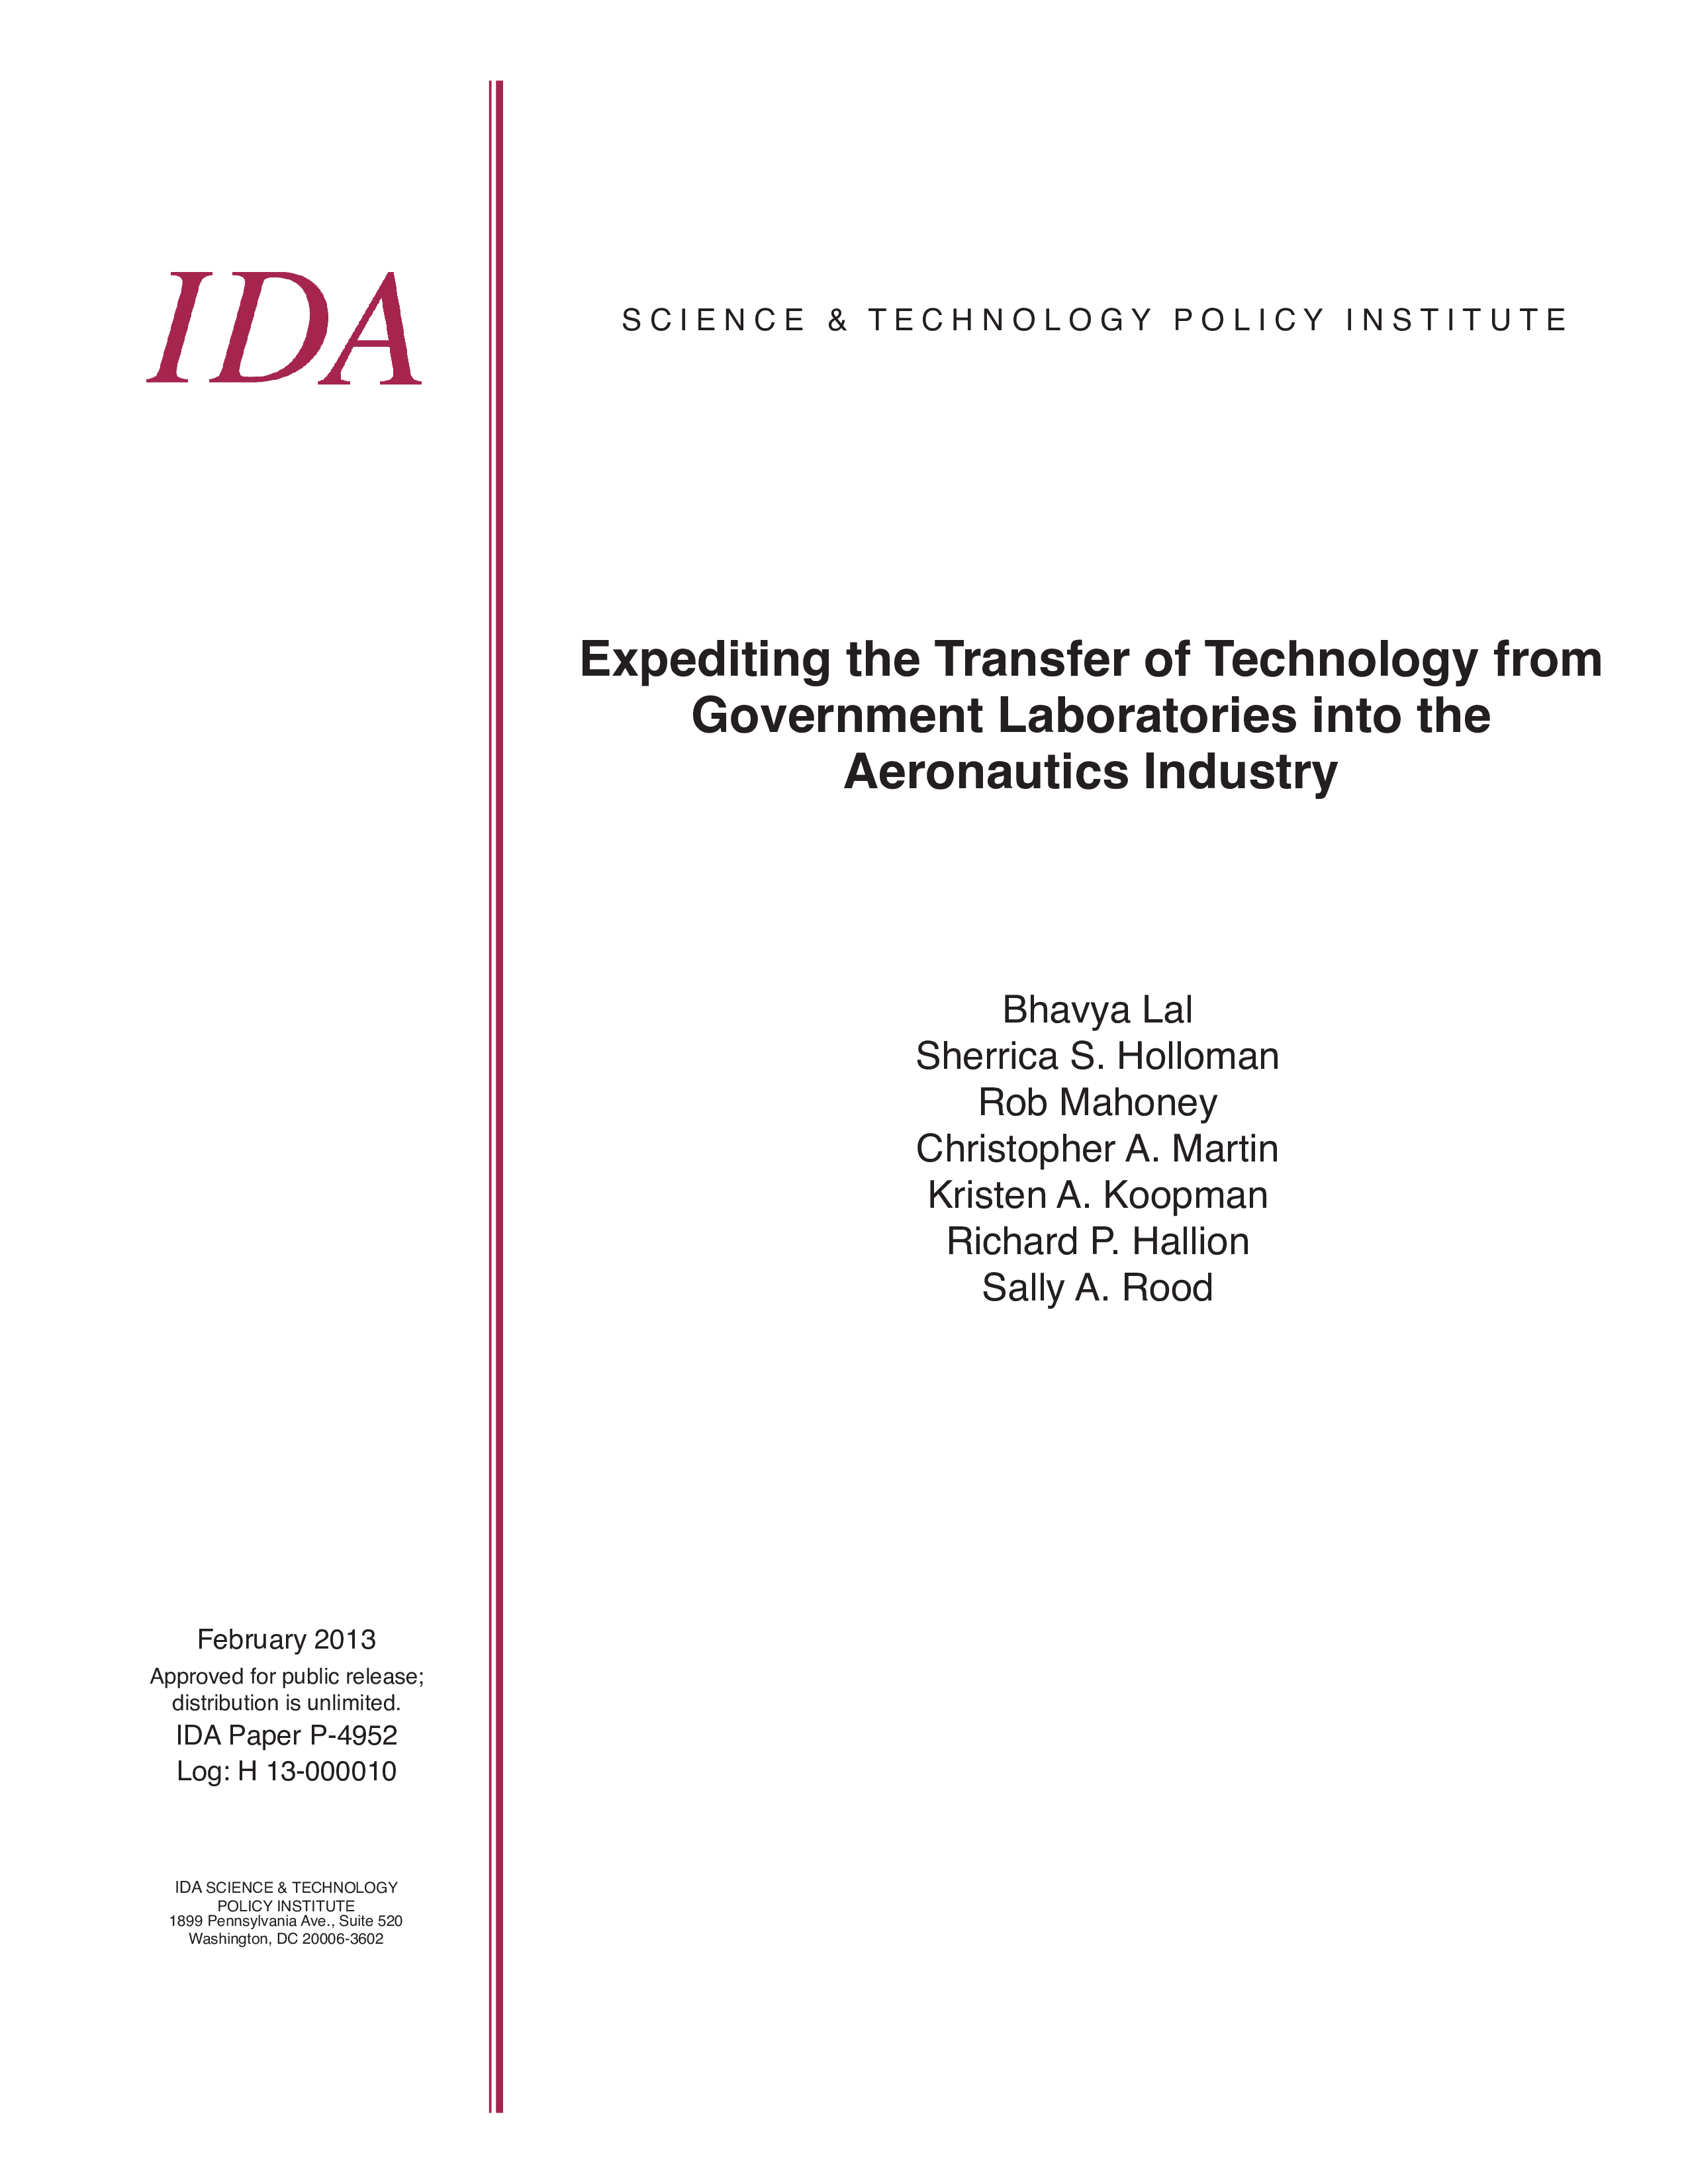 Expediting the Transfer of Technology from Government Laboratories into the Aeronautics Industry